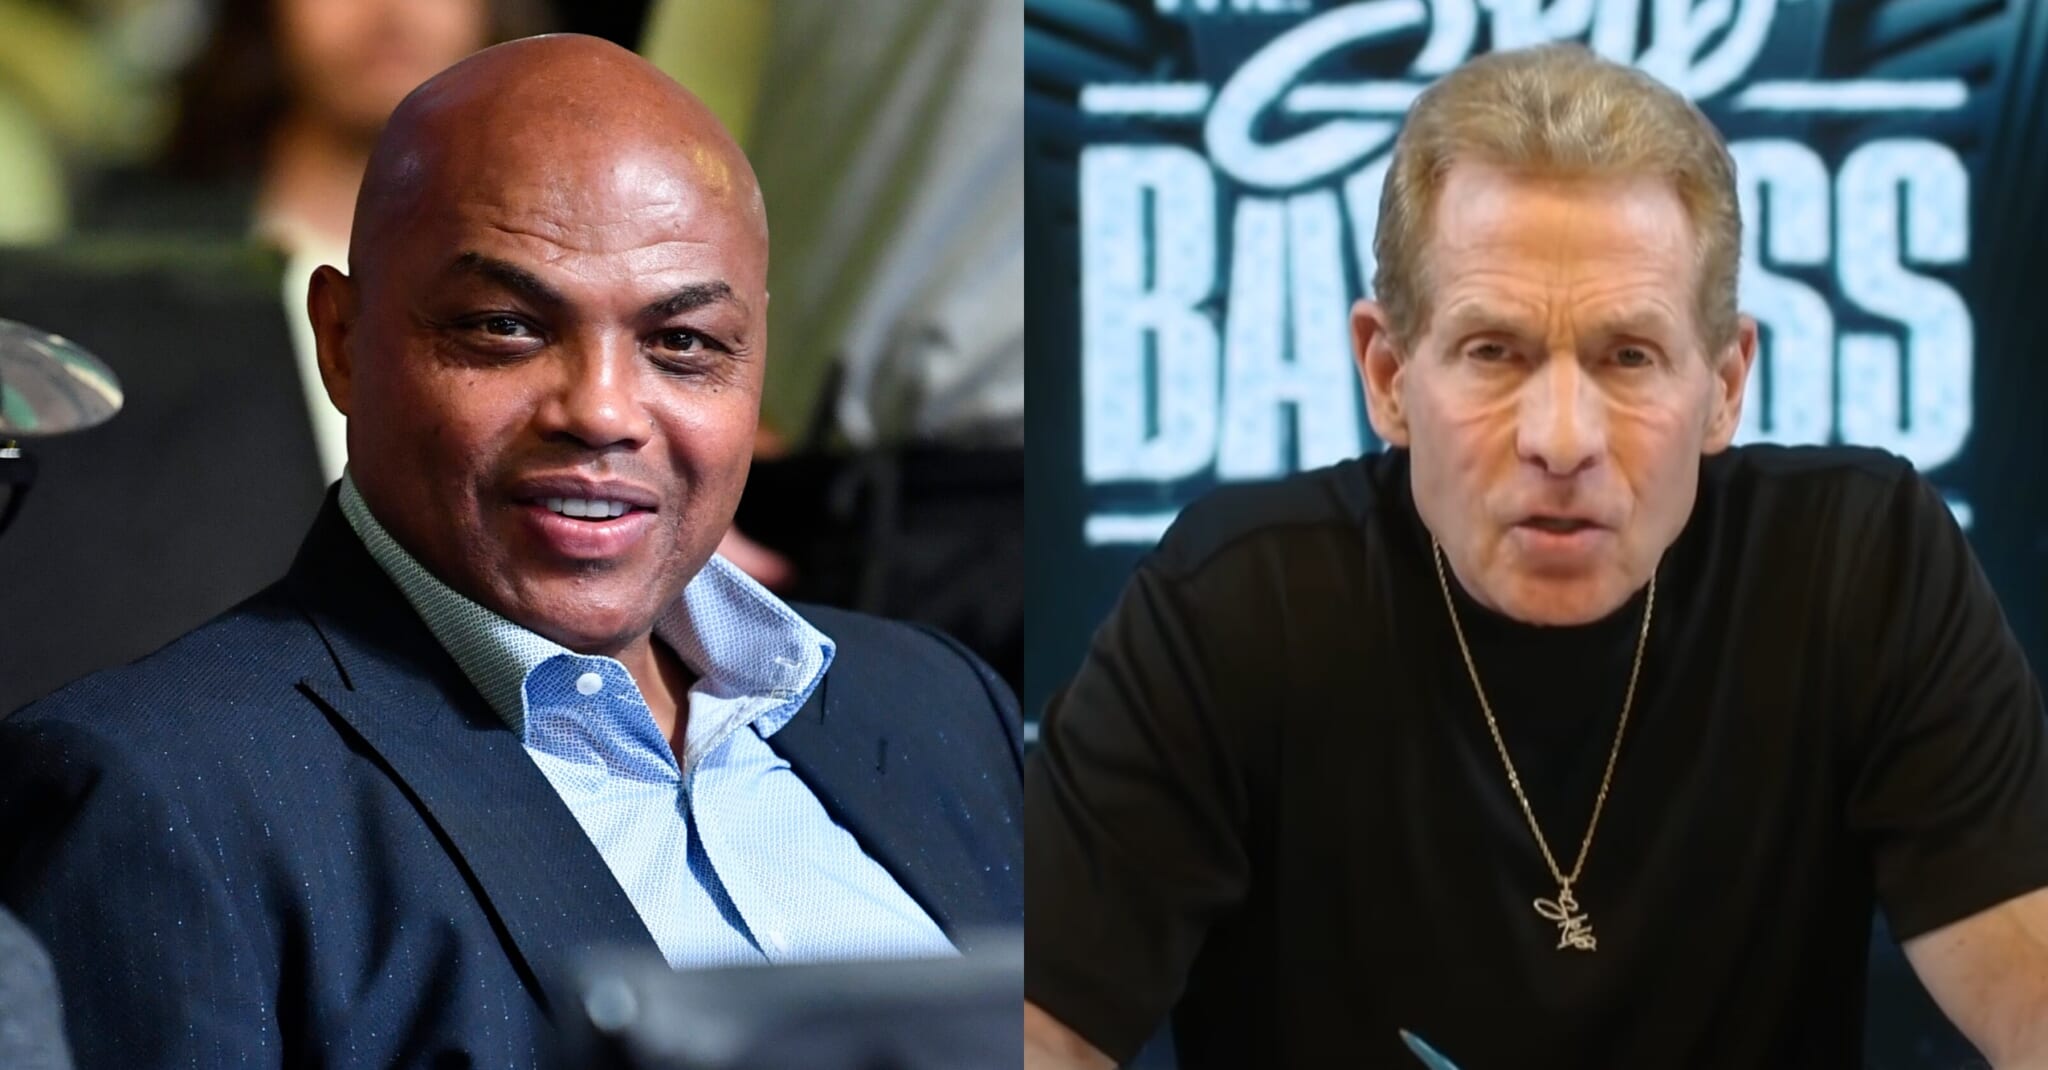 Skip Bayless Says Charles Barkley's 'Death Threats' Are Scaring His